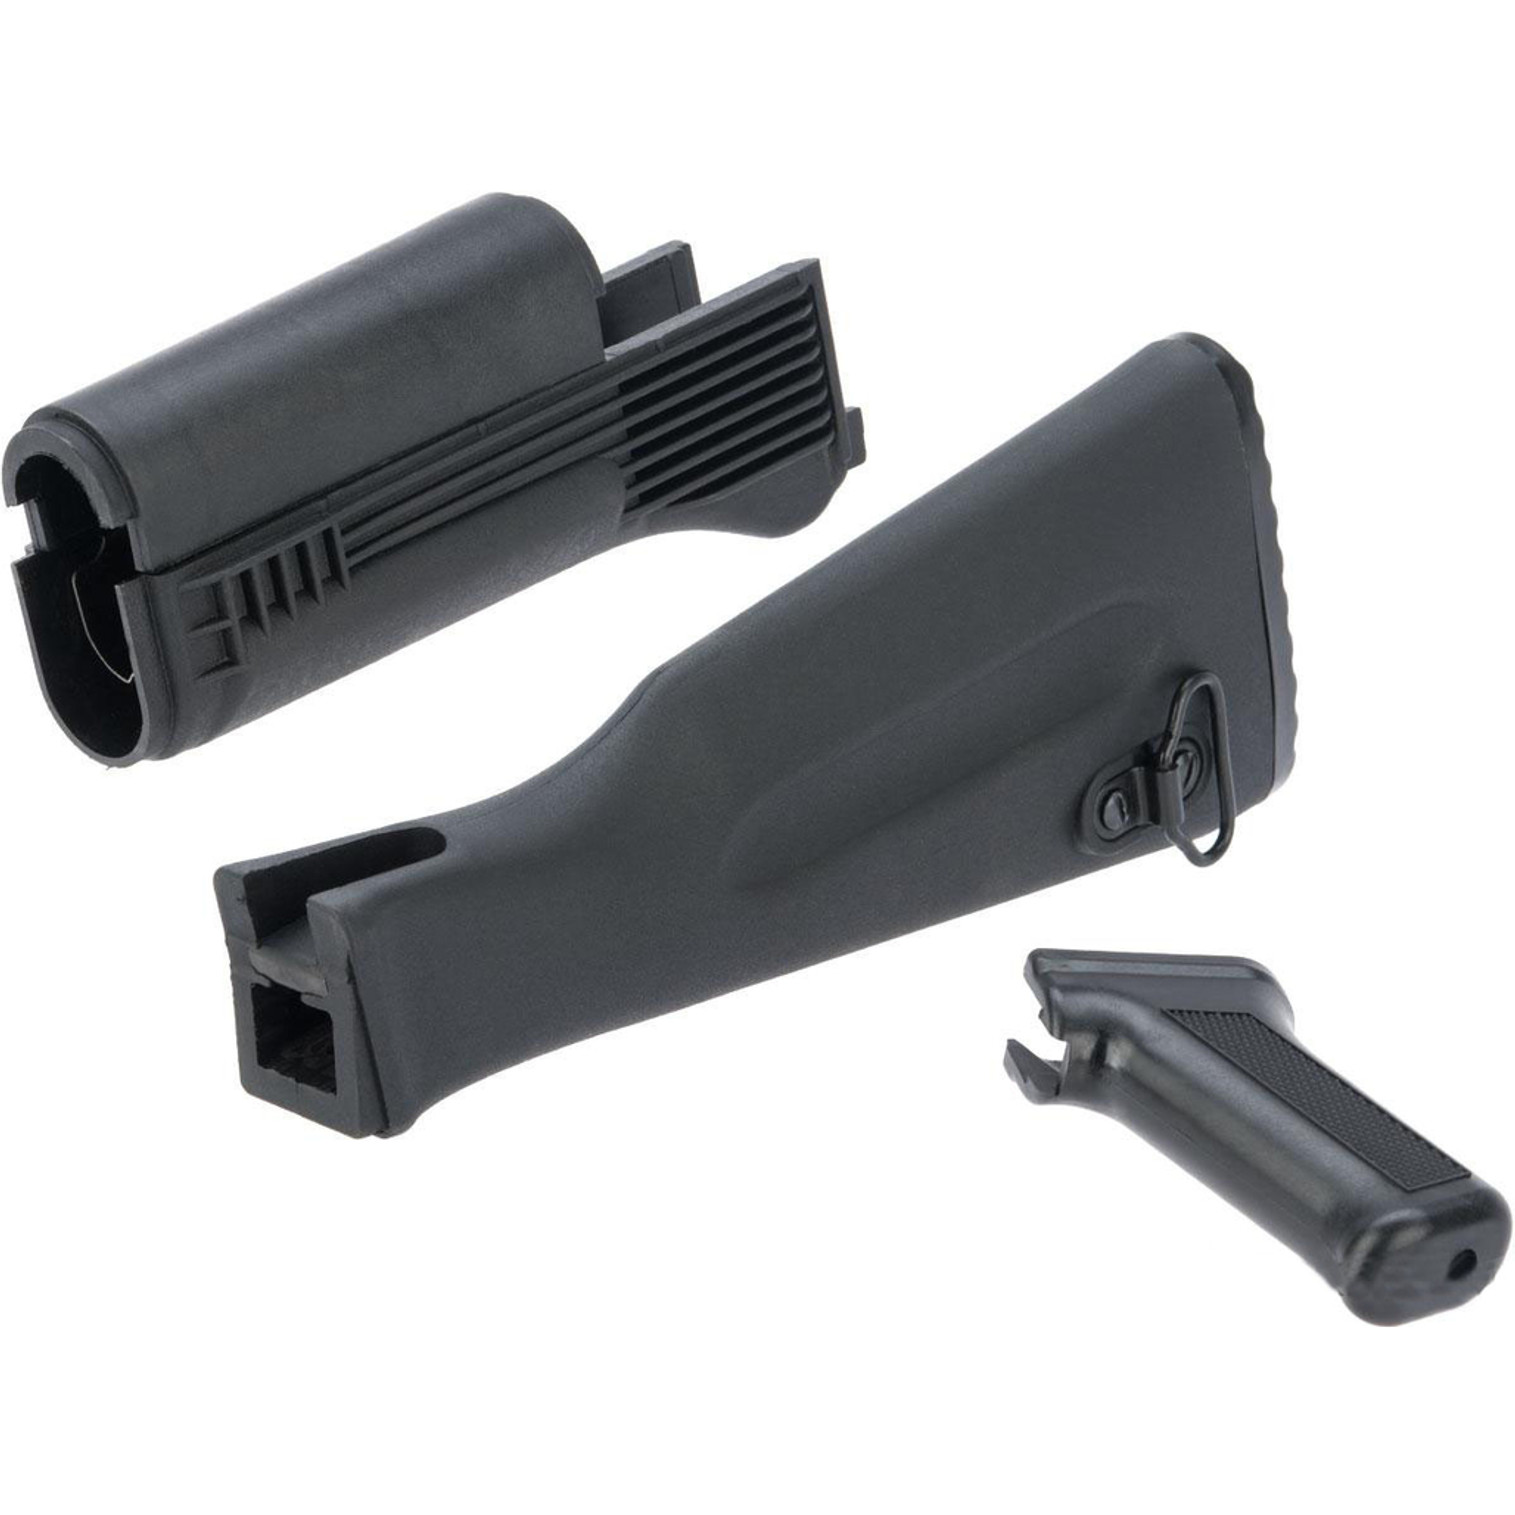 LCT Airsoft Polymer Stock and Grip Set for LCK74M Series Airsoft Rifles (Color: Black)